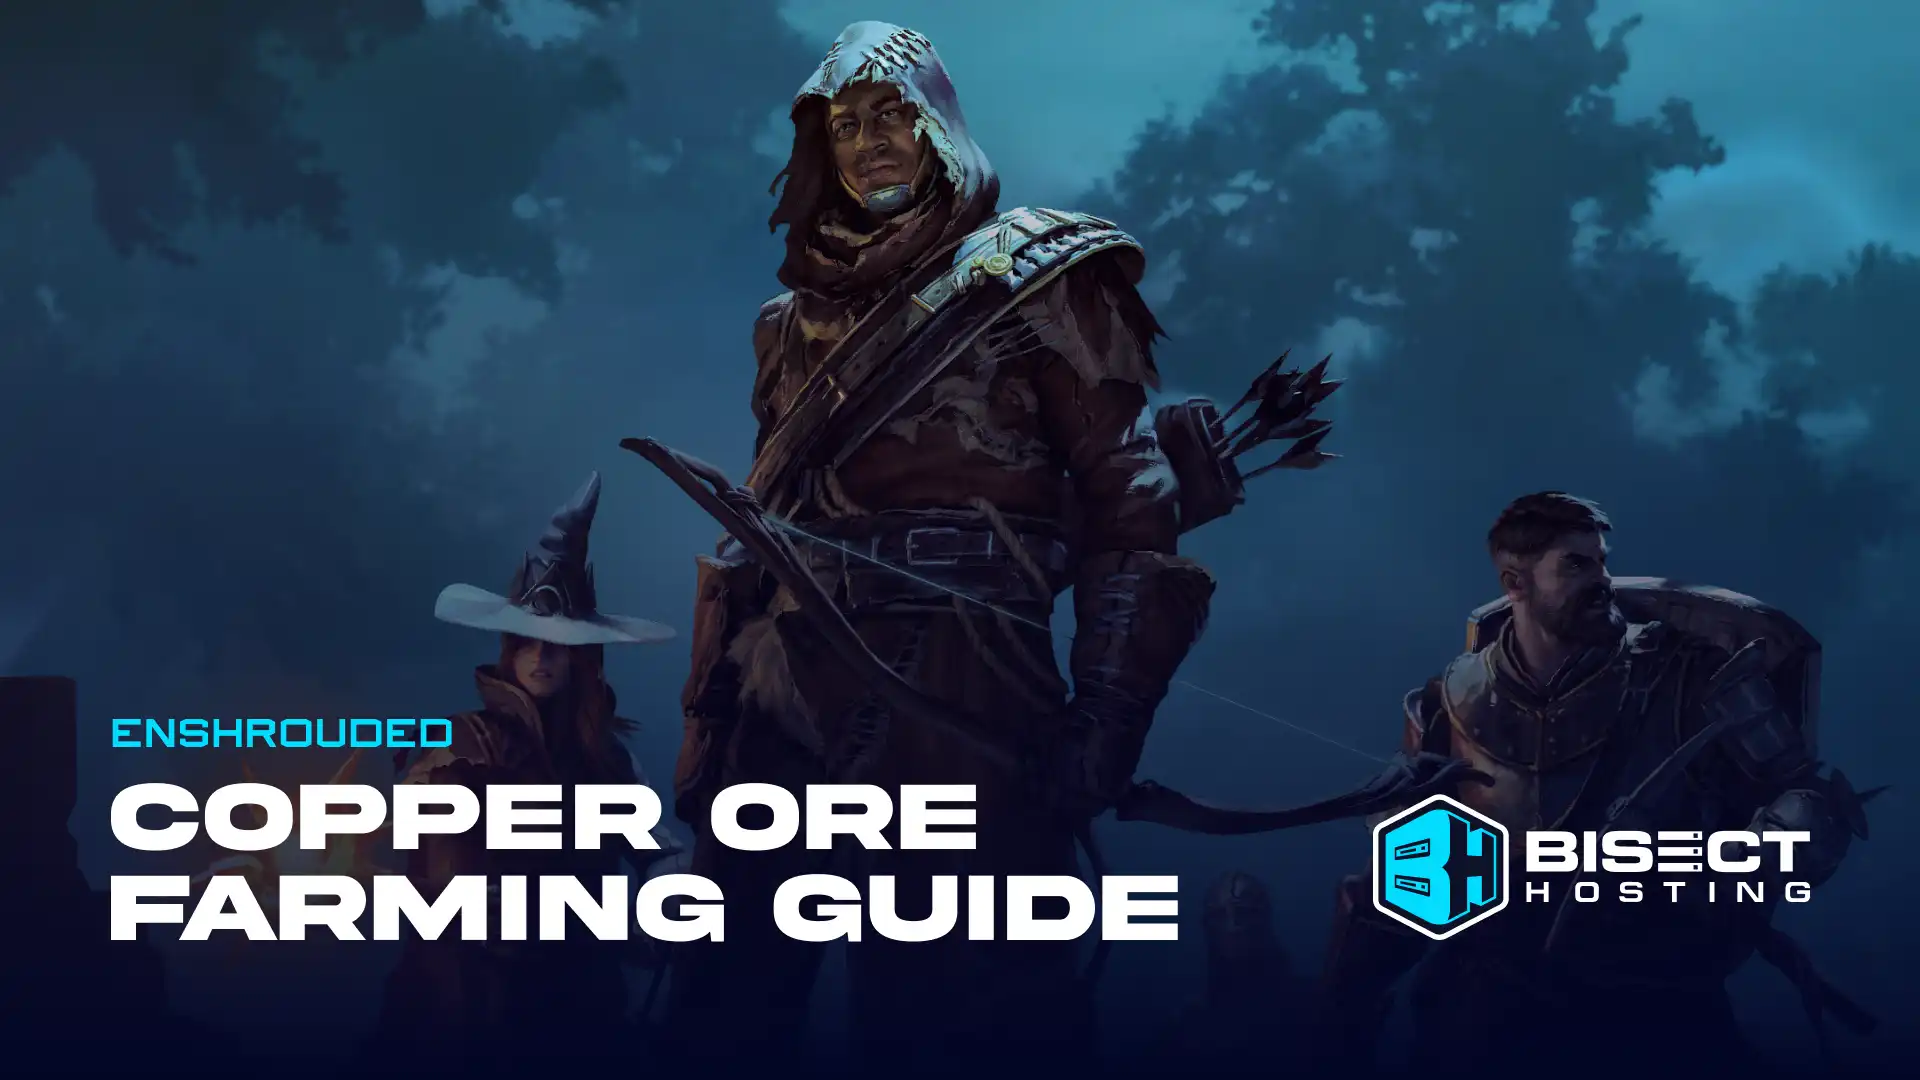 Enshrouded Copper Ore Farming Guide: Best Mining Locations & Crafting Recipes